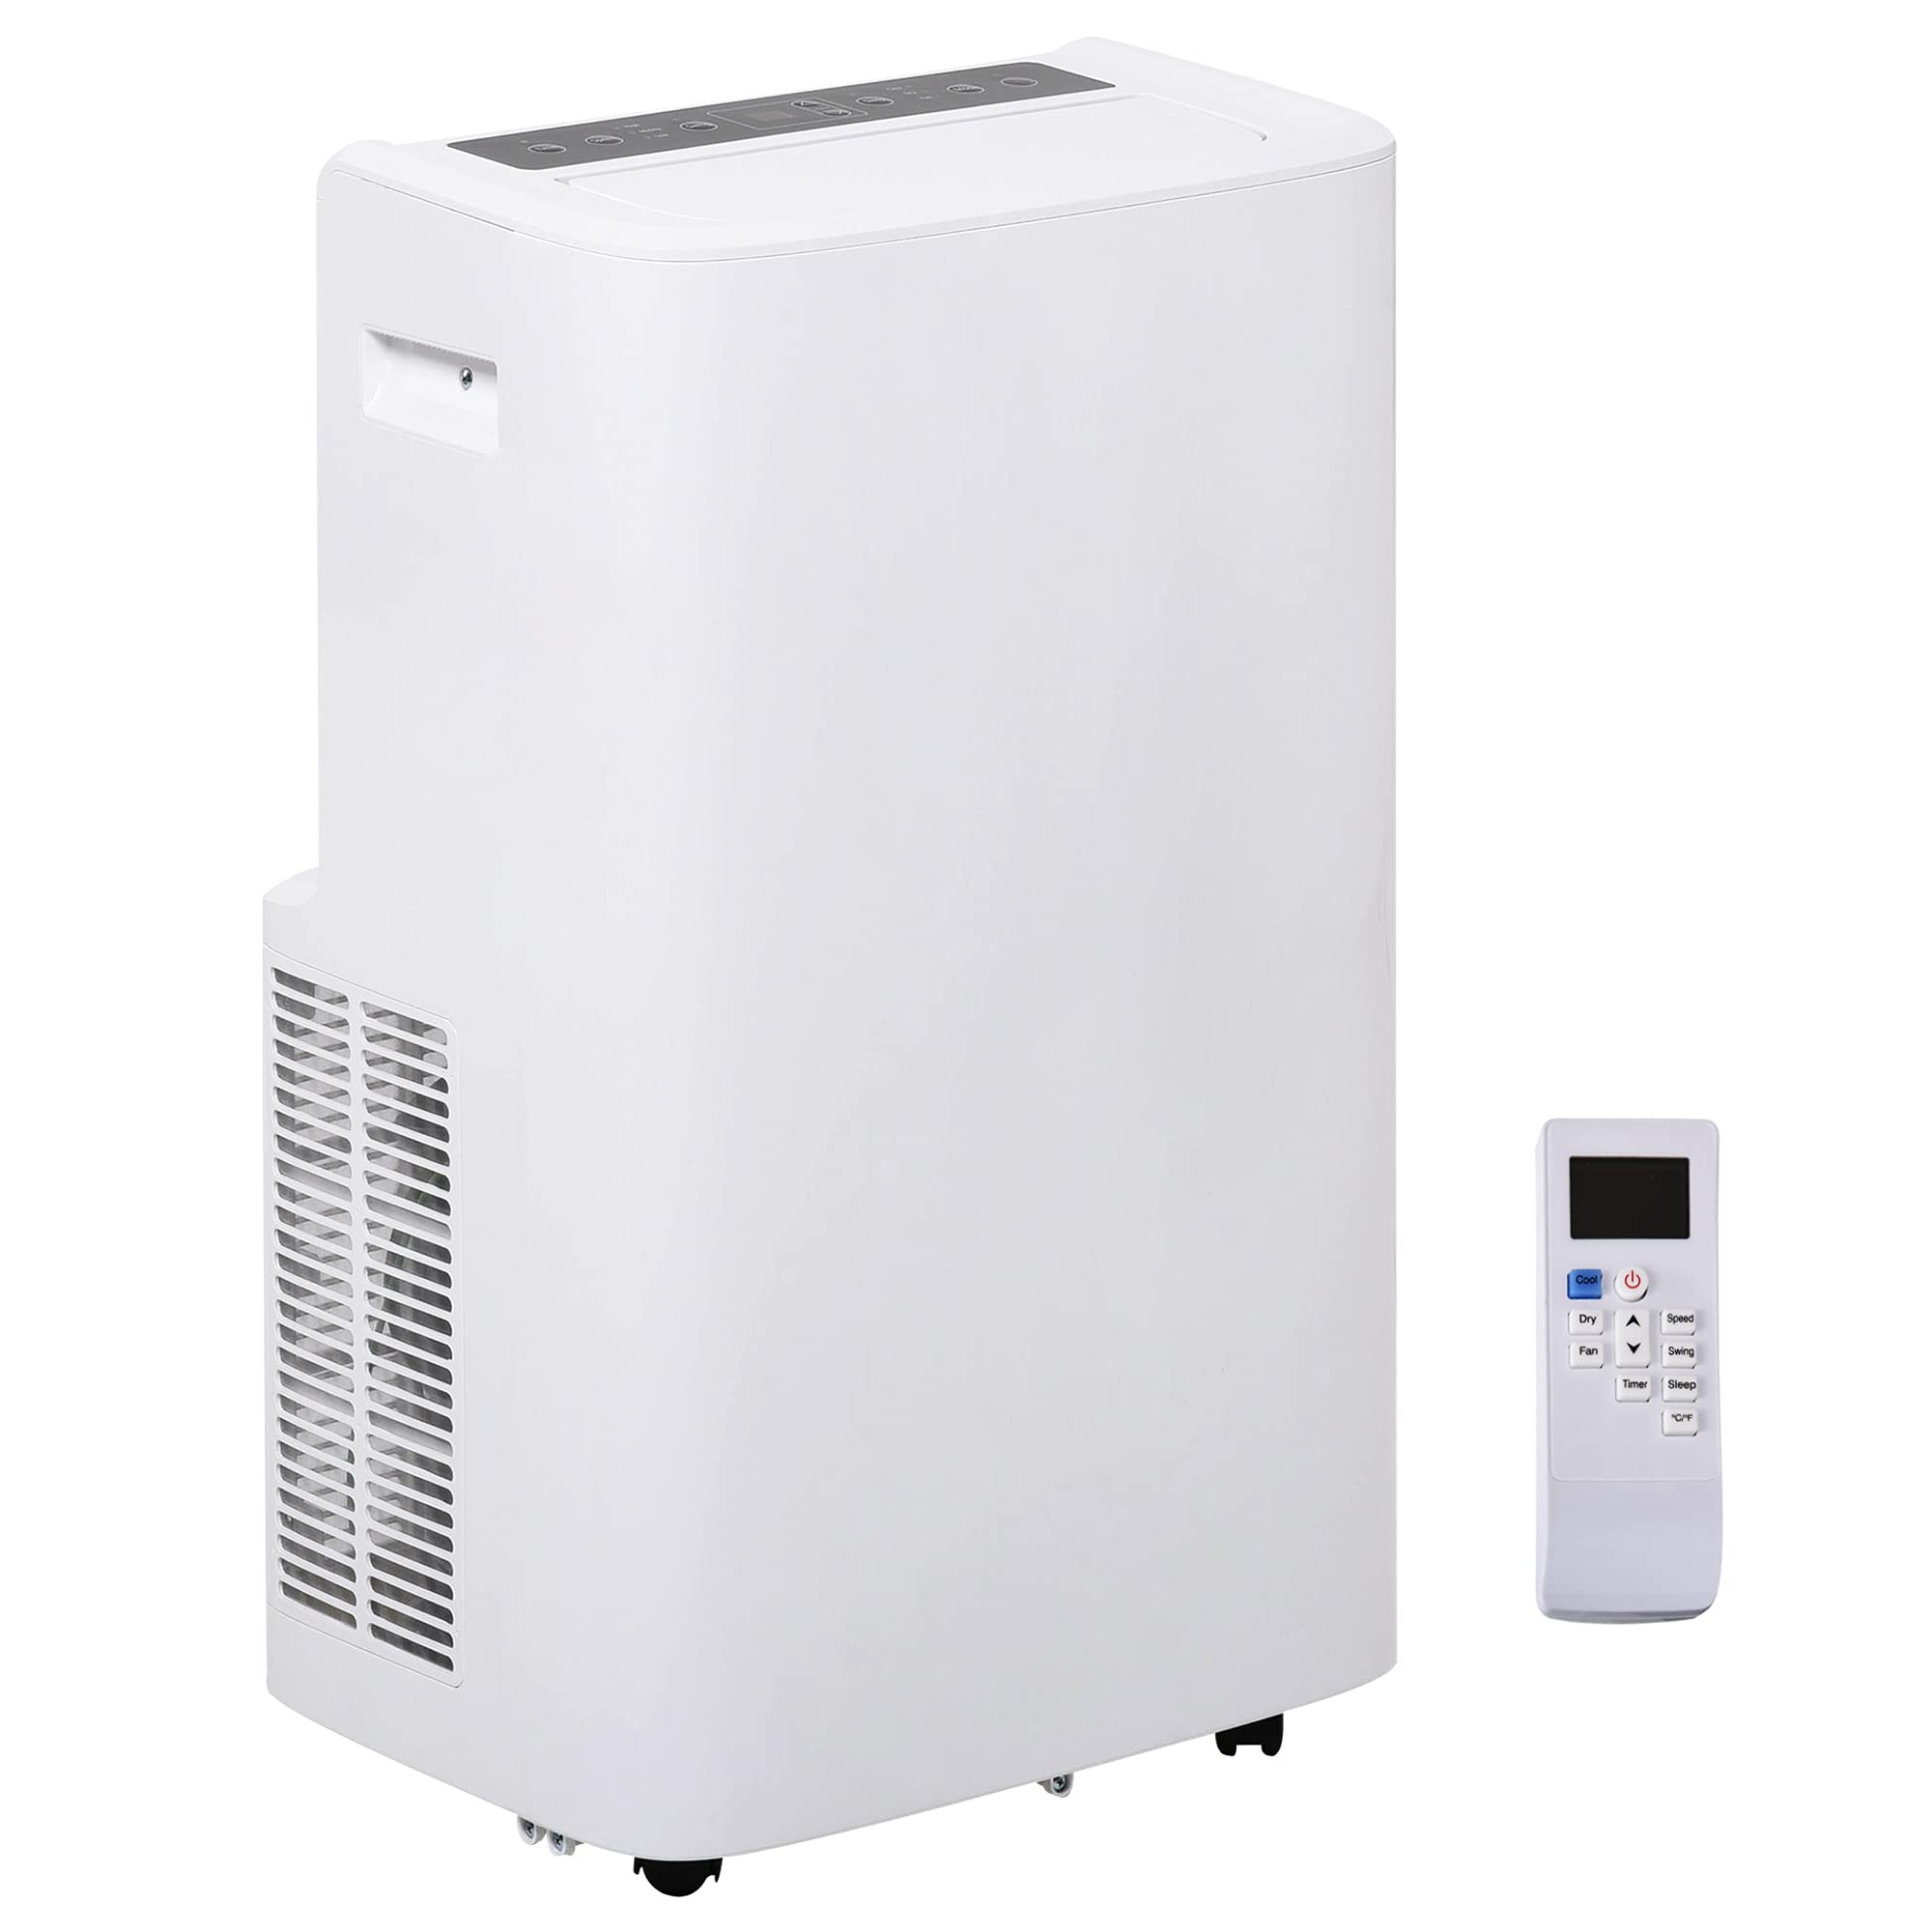 HOMcOM 12000 BTU Portable Air conditioner with cooling, Dehumidifier, Ventilating Function, Remote control,  LED Display, White